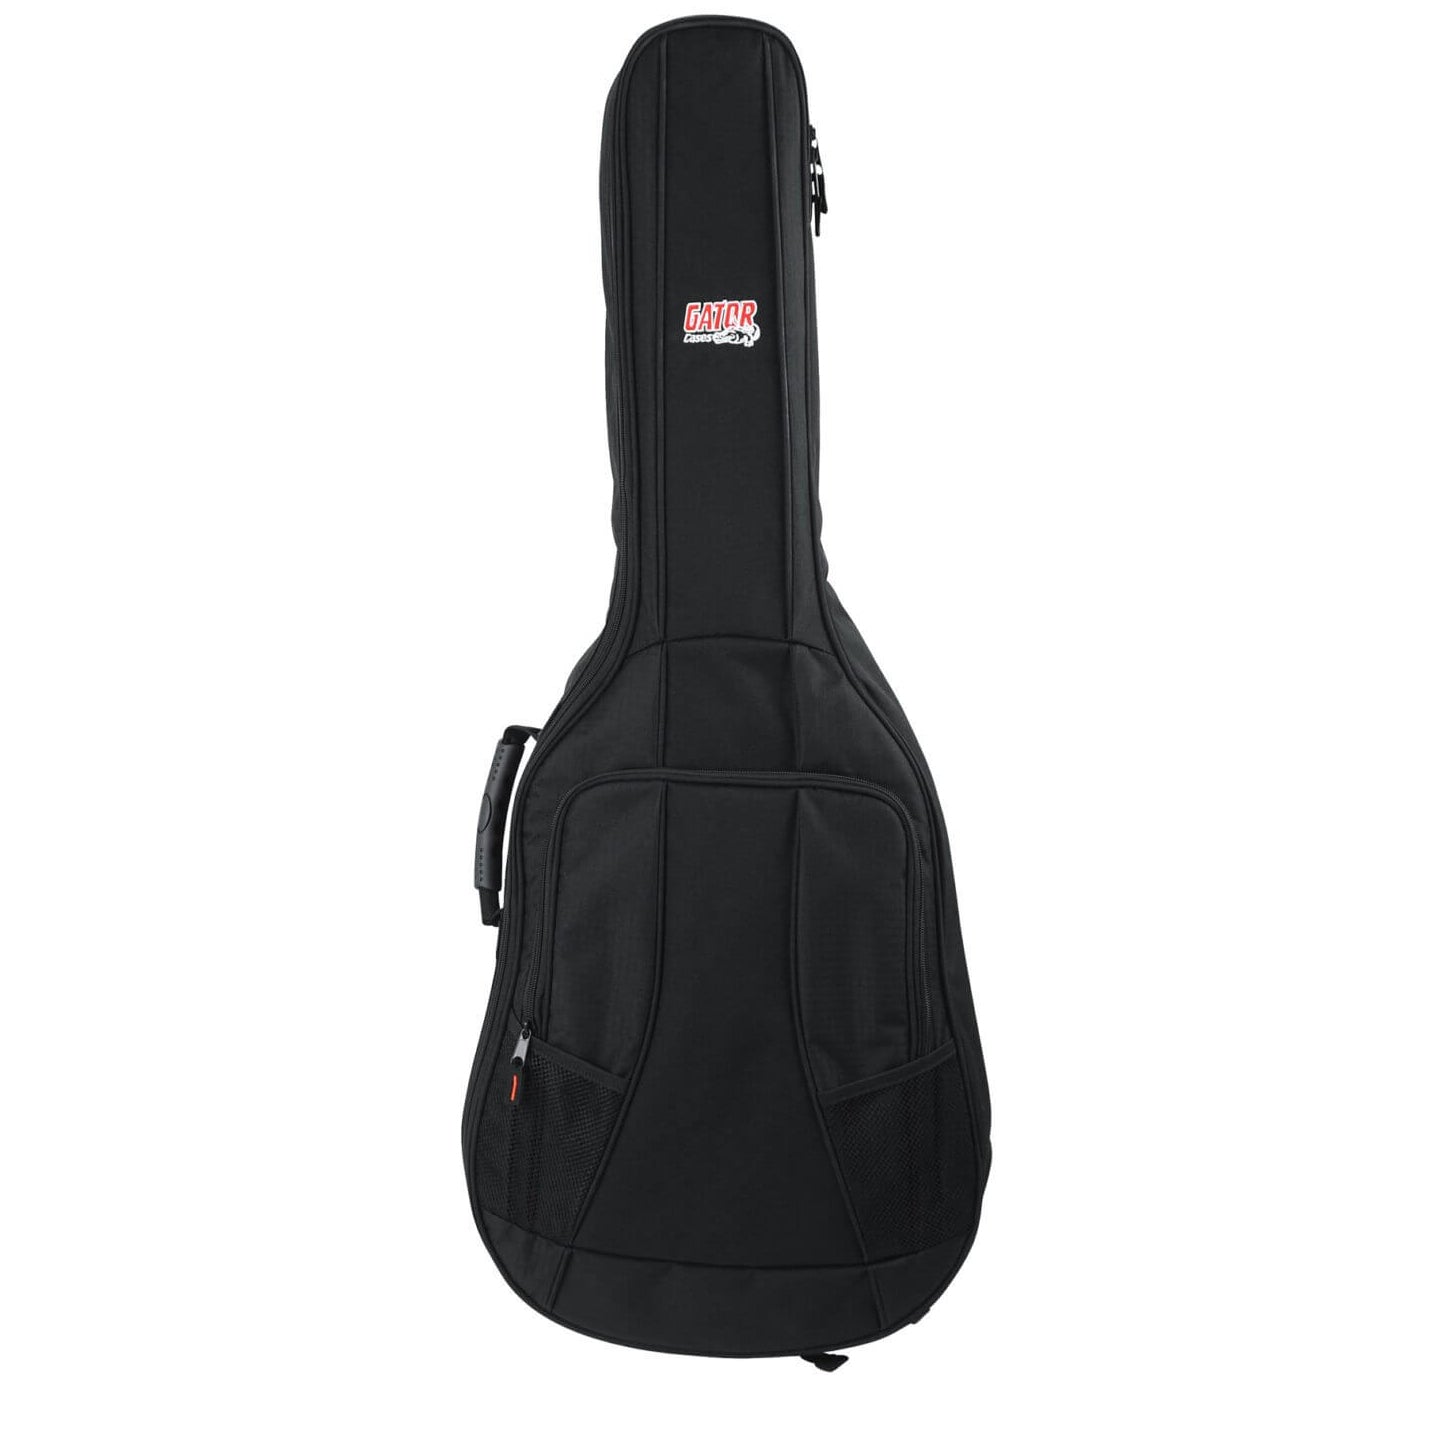 Shop online for Gator 4G Series Classical Guitar Gig Bag today. Now available for purchase from Midlothian Music of Orland Park, Illinois, USA